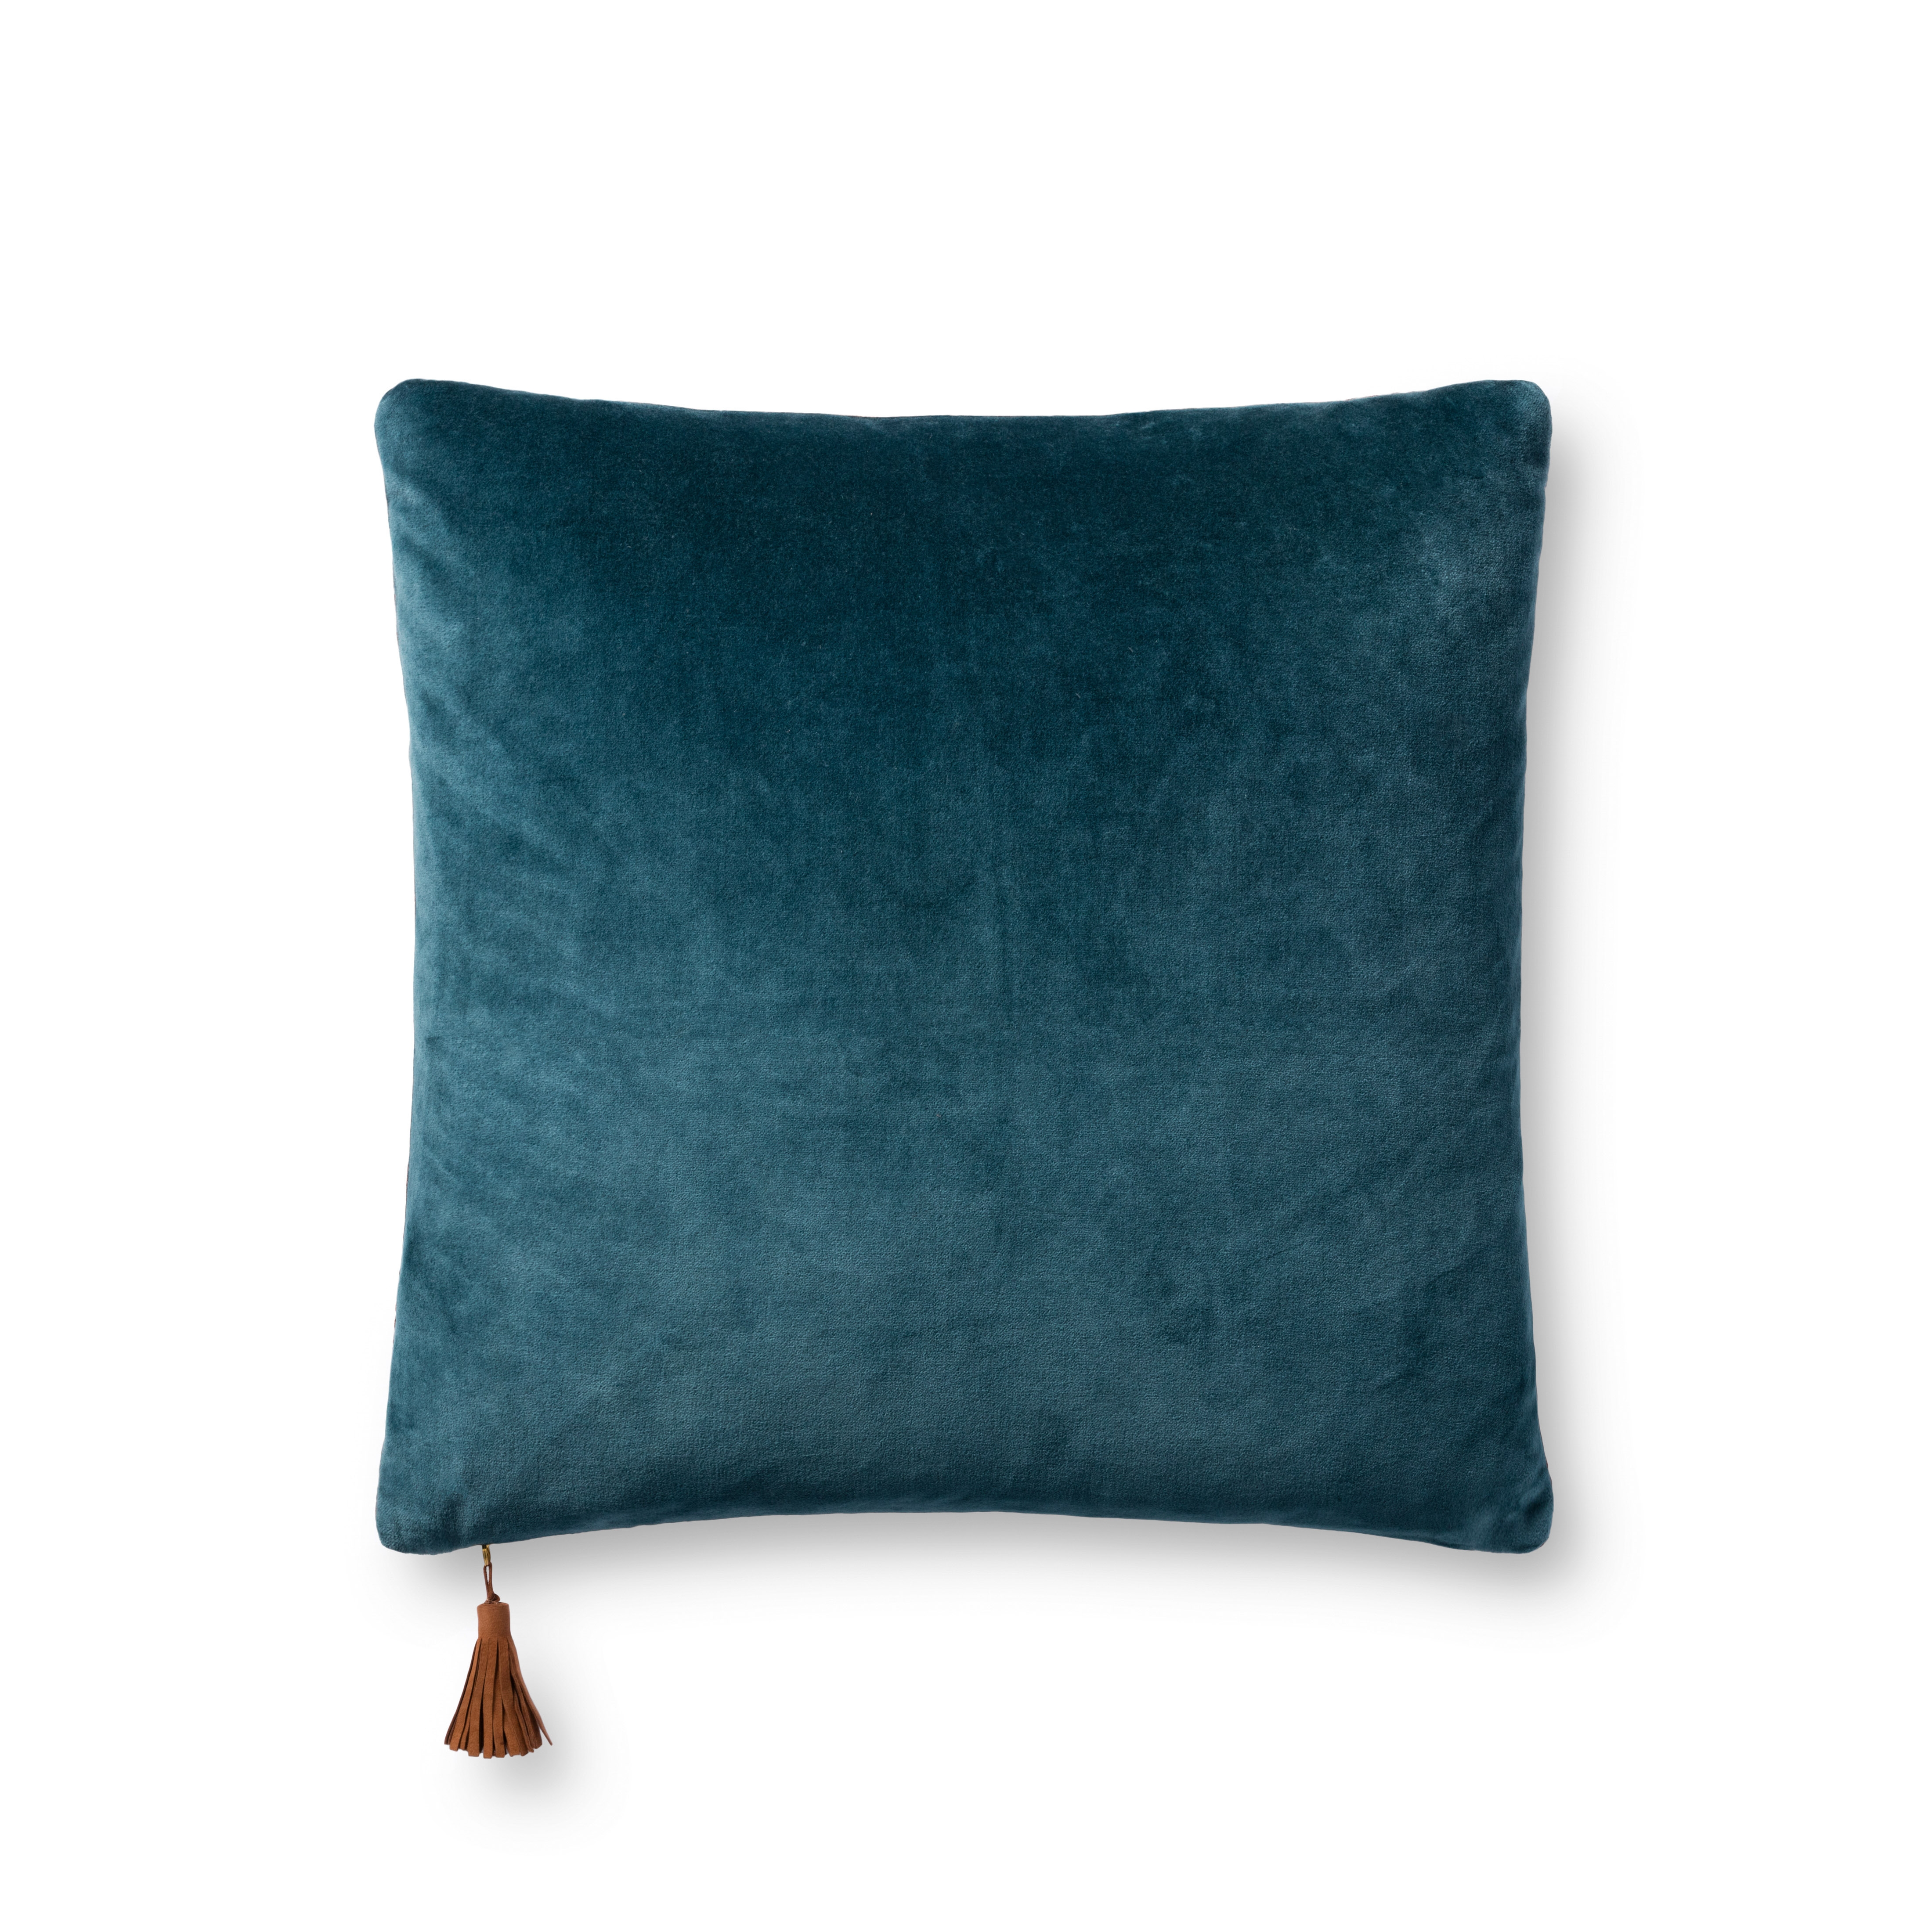 PILLOWS P1153 NAVY / COFFEE 18" x 18" Cover w/Down - Image 0